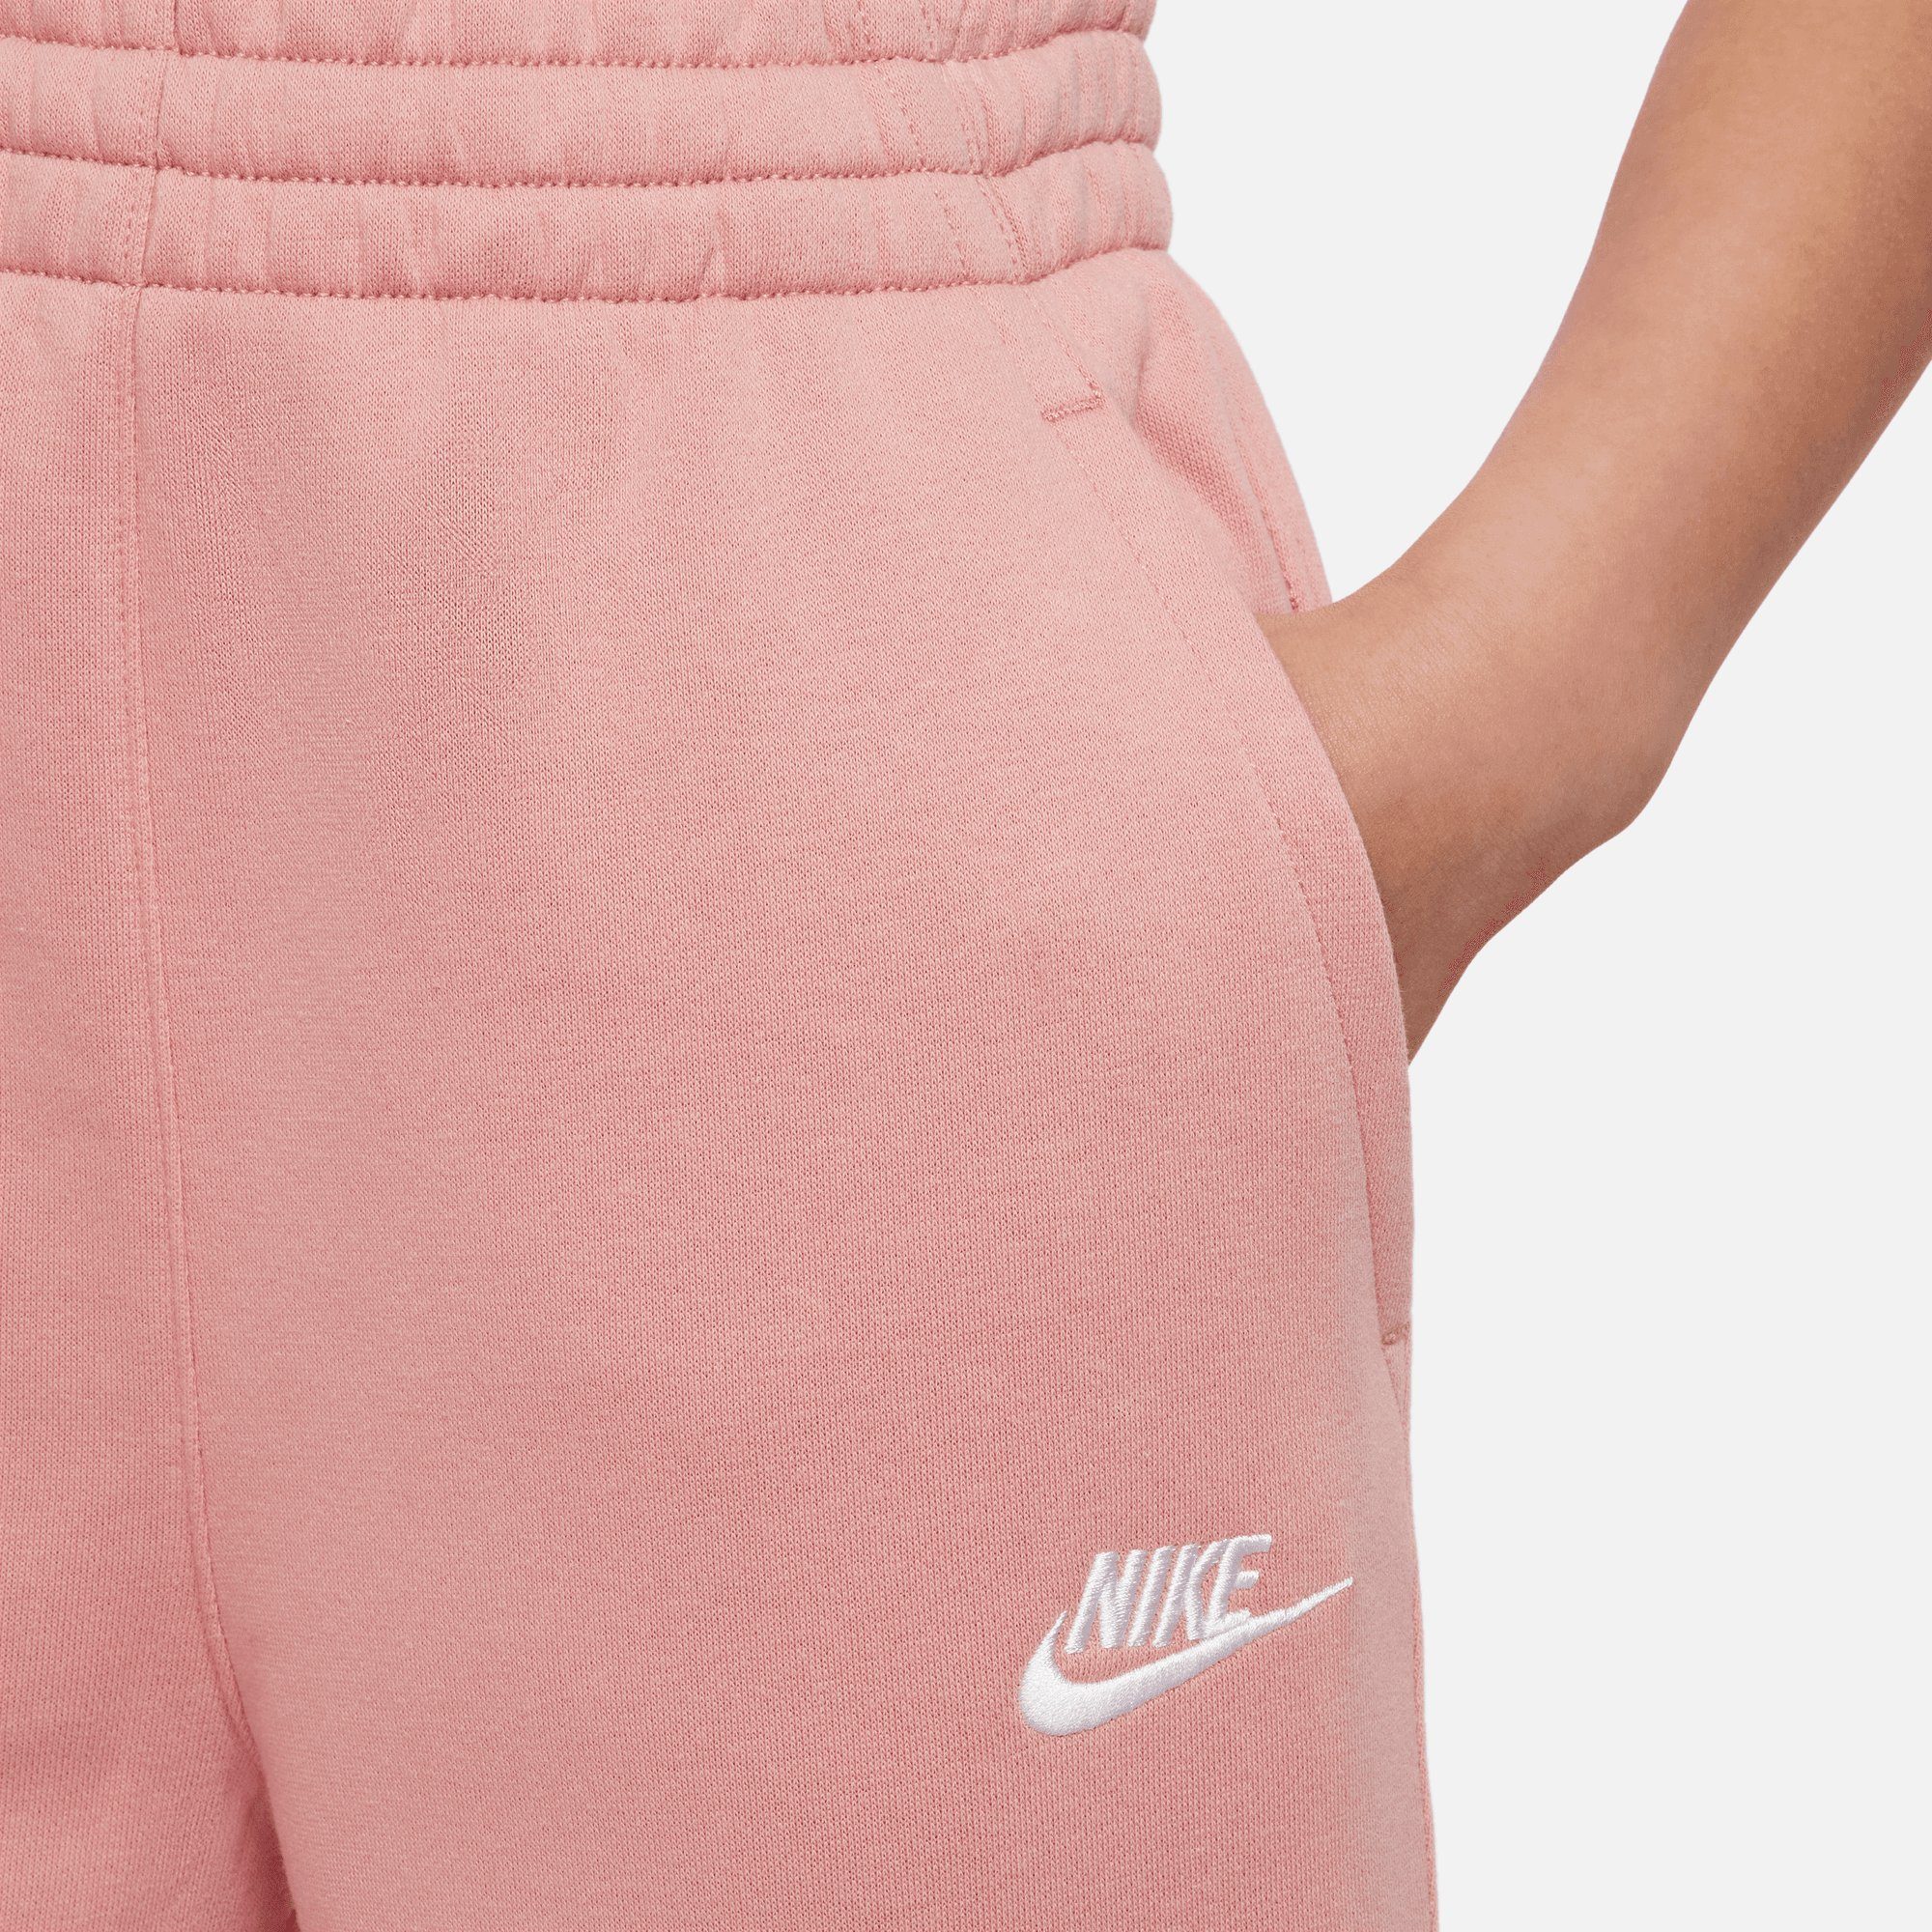 FITTED STARDUST/RED BIG RED PANTS KIDS' Jogginghose STARDUST/WHITE FLEECE (GIRLS) CLUB HIGH-WAISTED Nike Sportswear